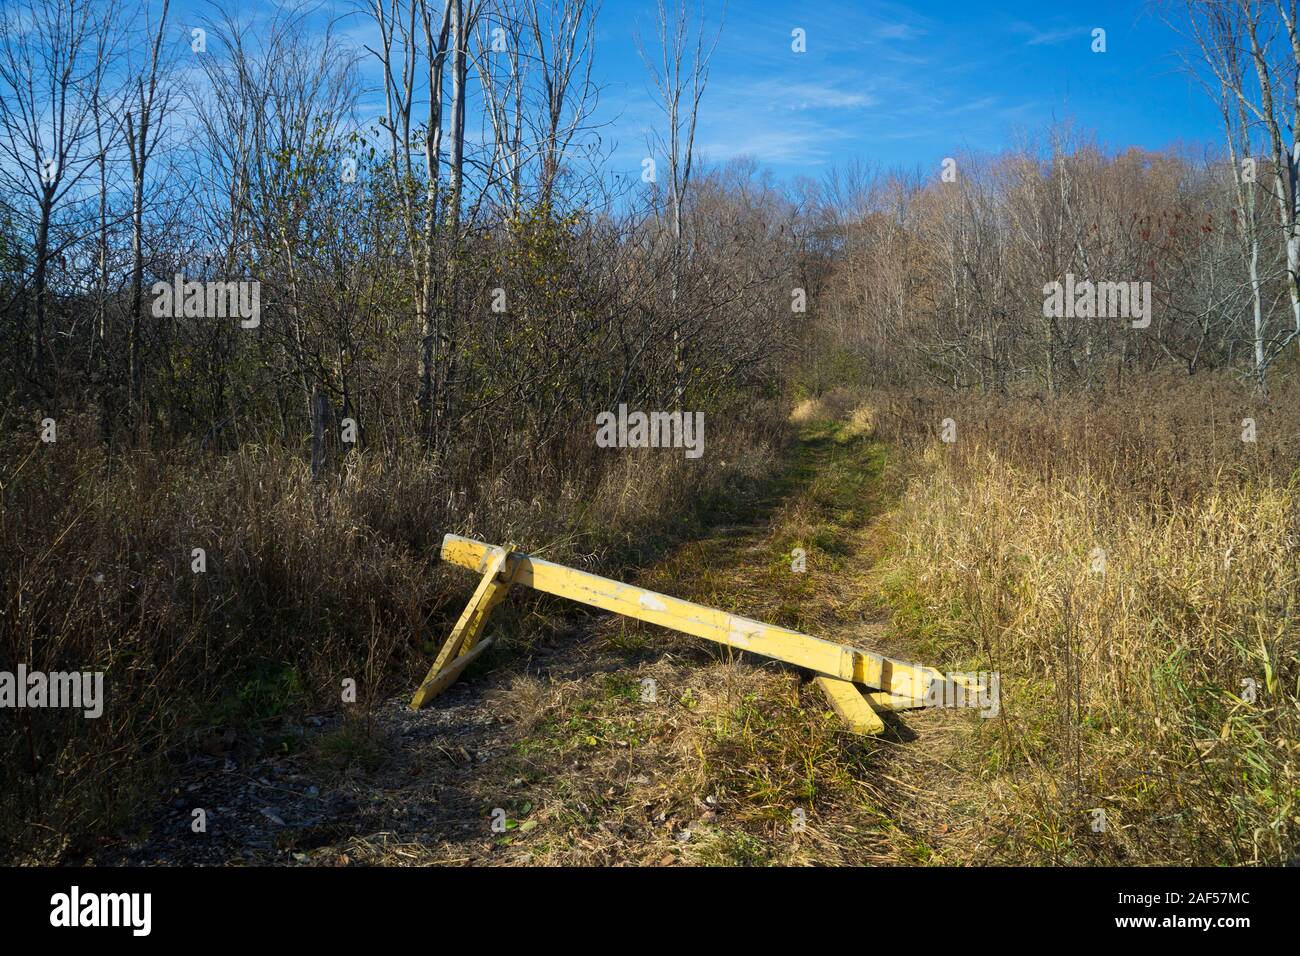 Old yellow wooden saw horse blocking the entrance to a grassy forest road in Canada. Stock Photo